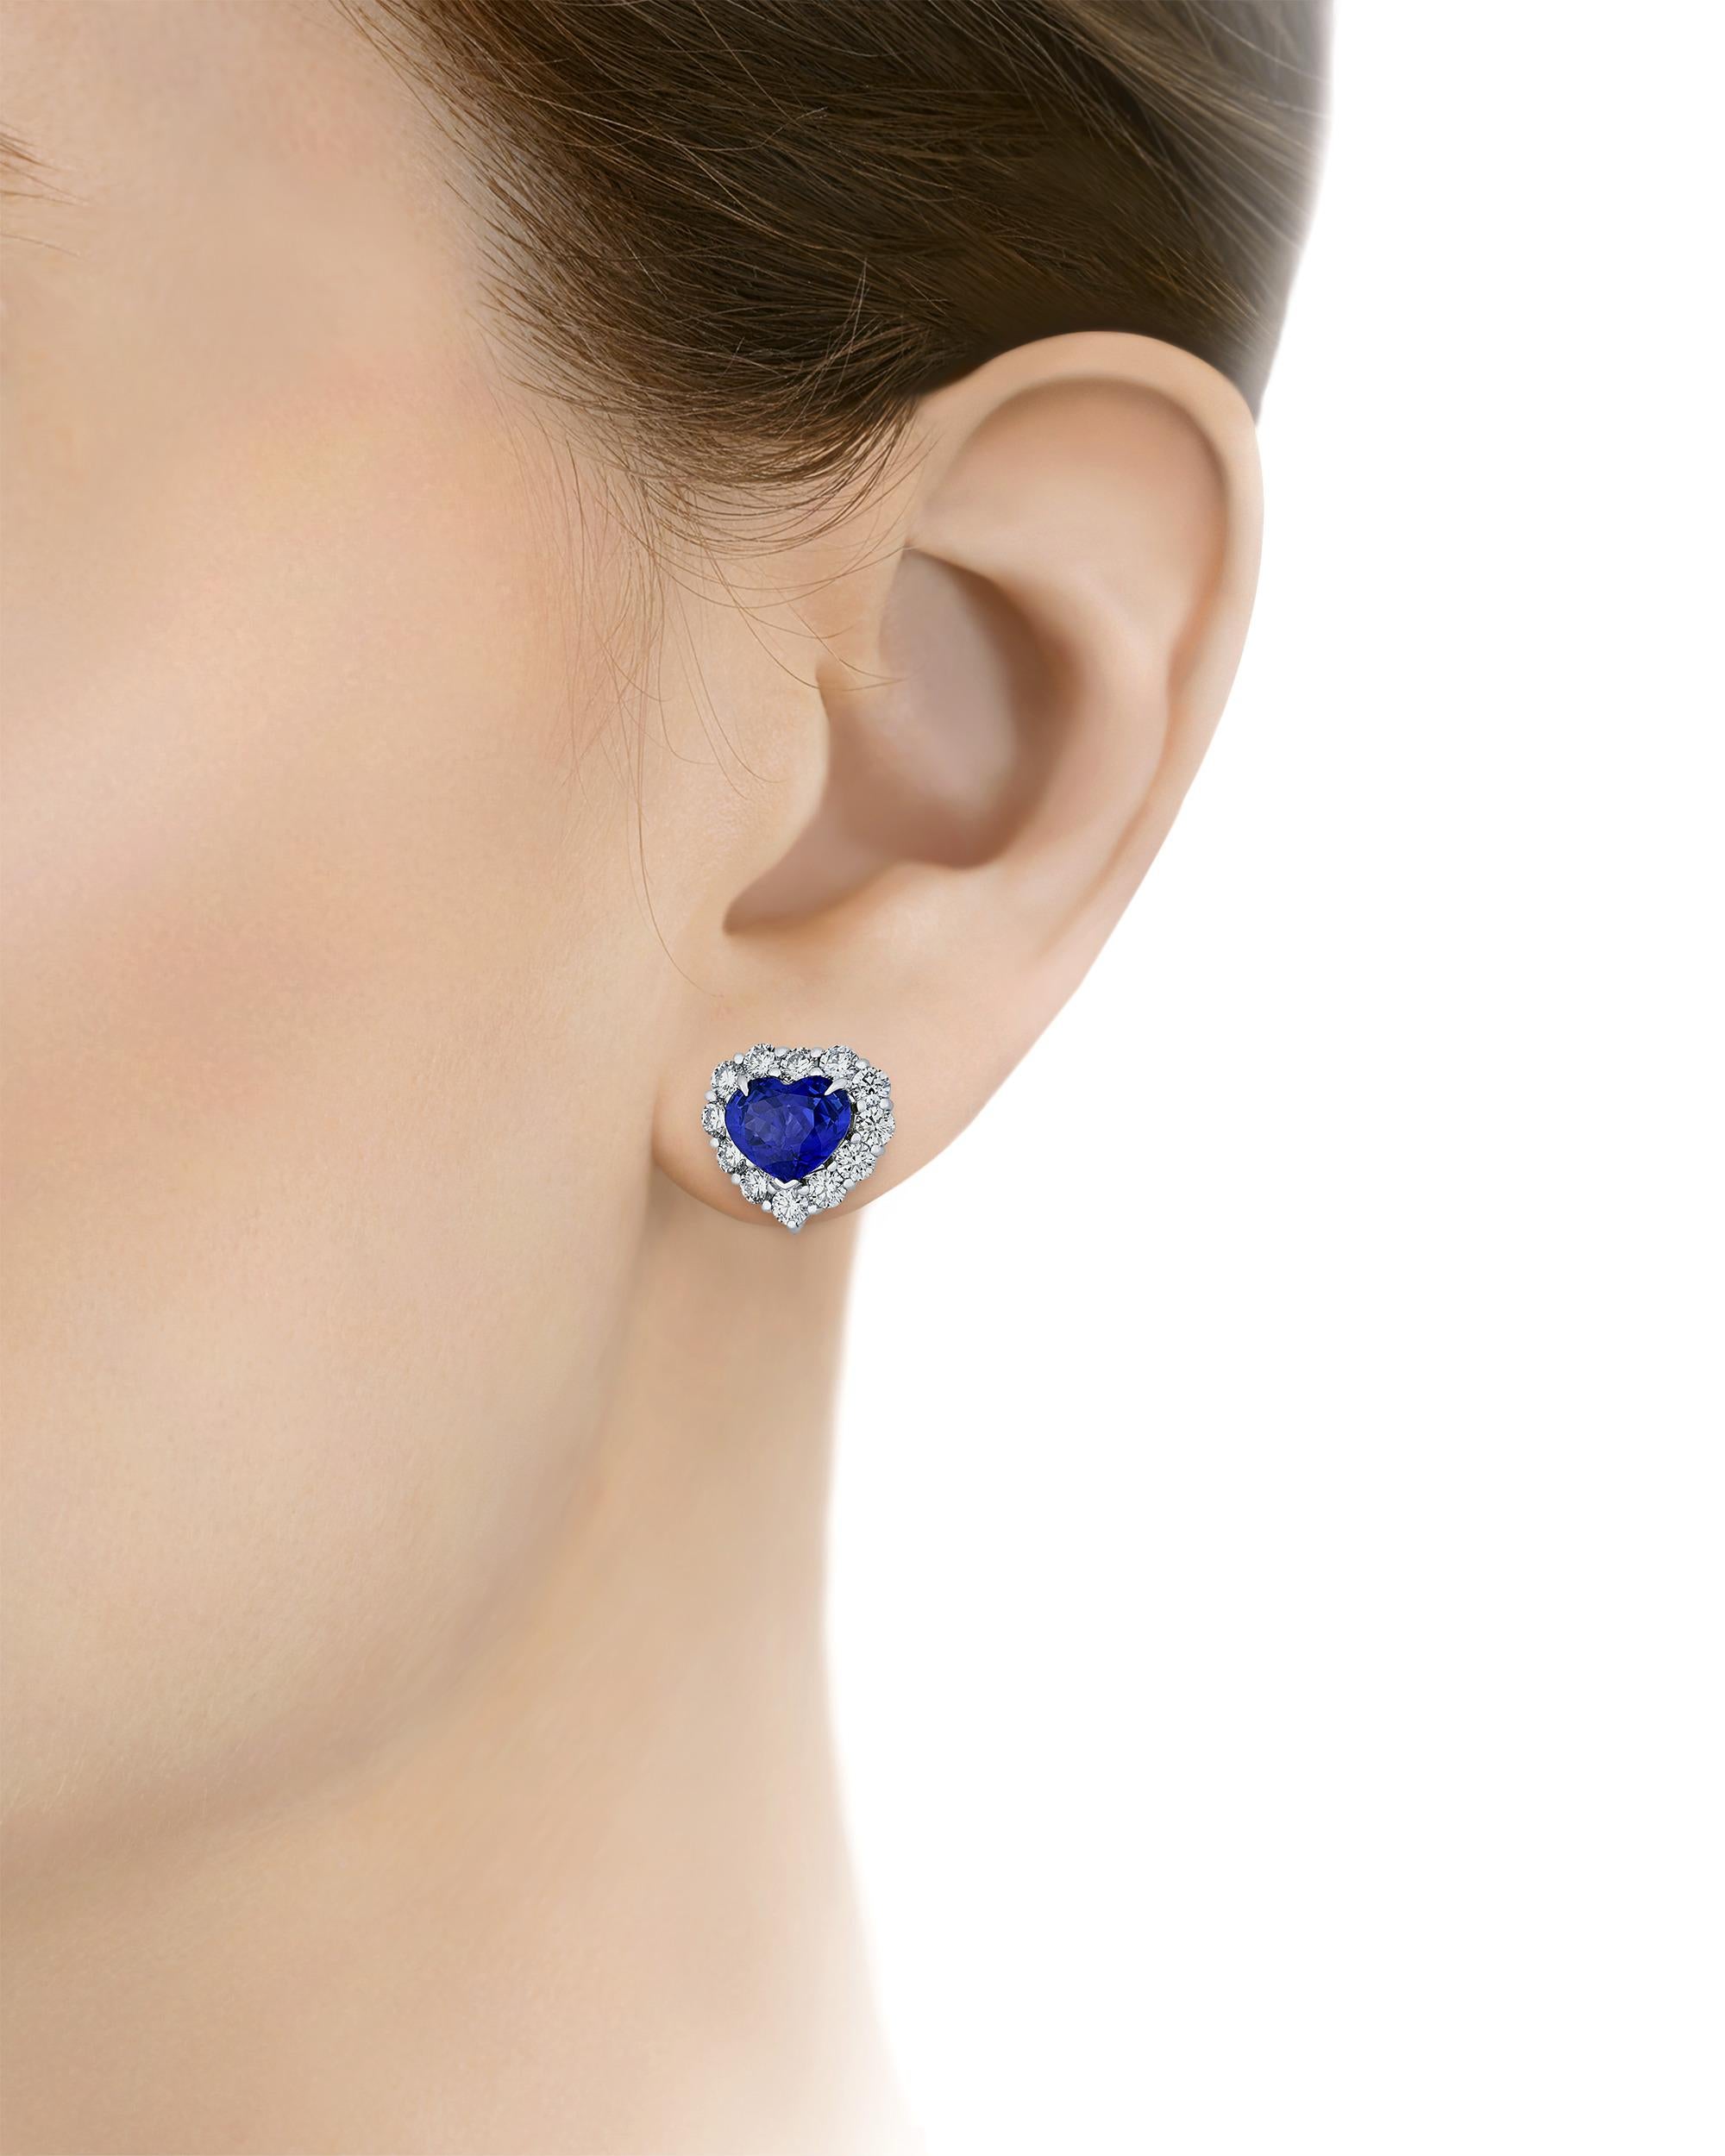 Two impressive heart-shaped Ceylon sapphires totaling 6.11 carats are set in these glamorous earrings. Displaying the vivid 